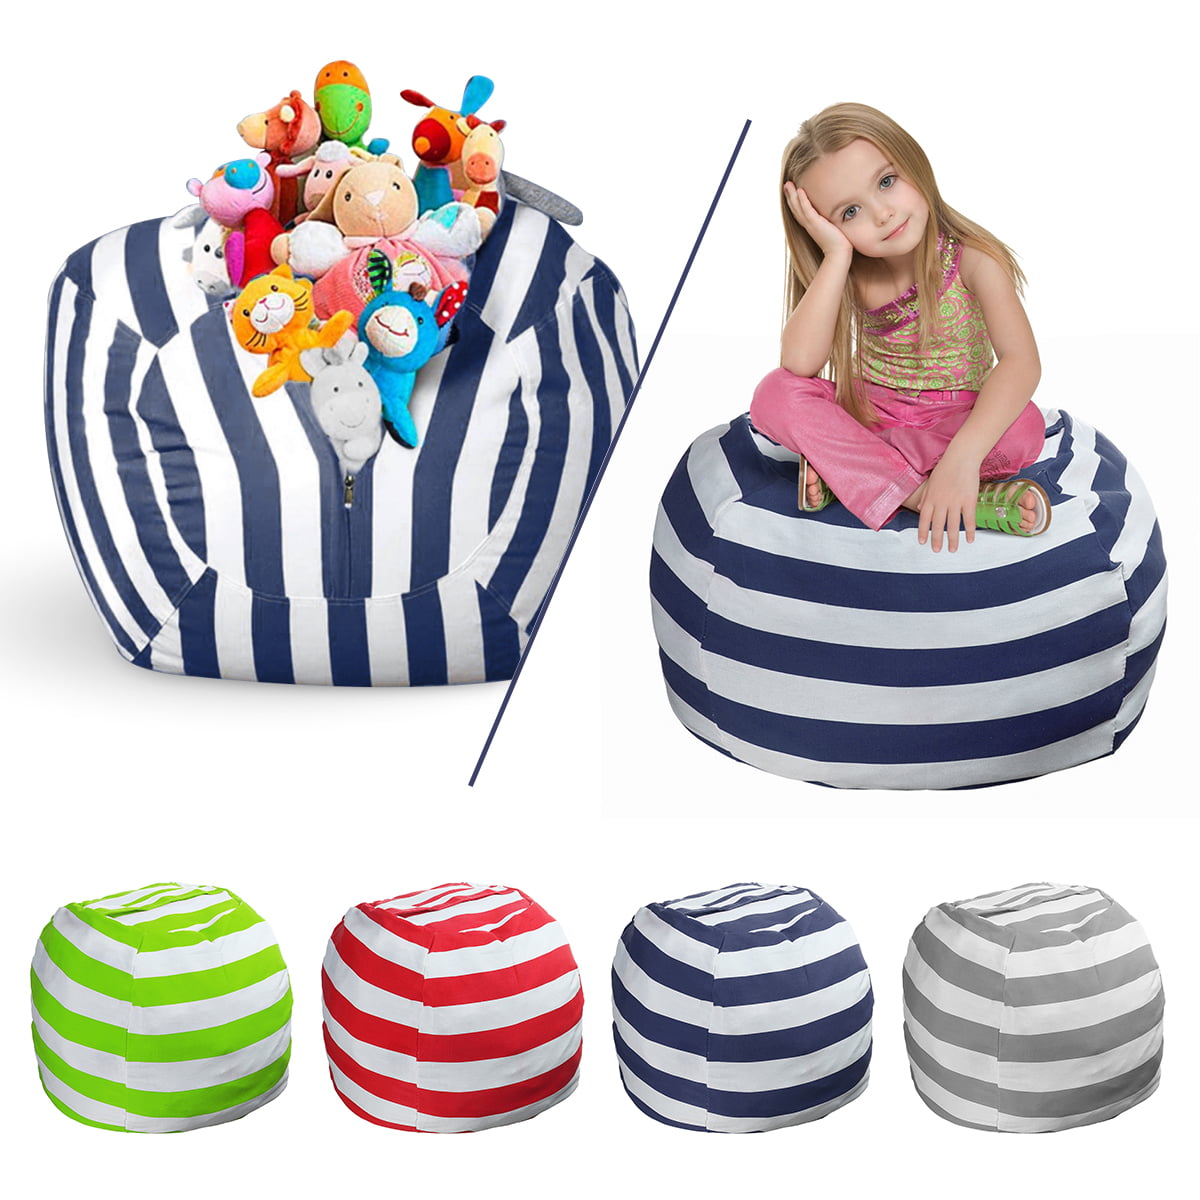 38 GERMANY, 38 Large Bean Bag Storage for Kids Stuffed Animals 2018 World Cup Top 32 Nations Flag Soccer Style Push Toy Organizer for Child Bedroom Towels and Yarn Storage Solution for Clothes